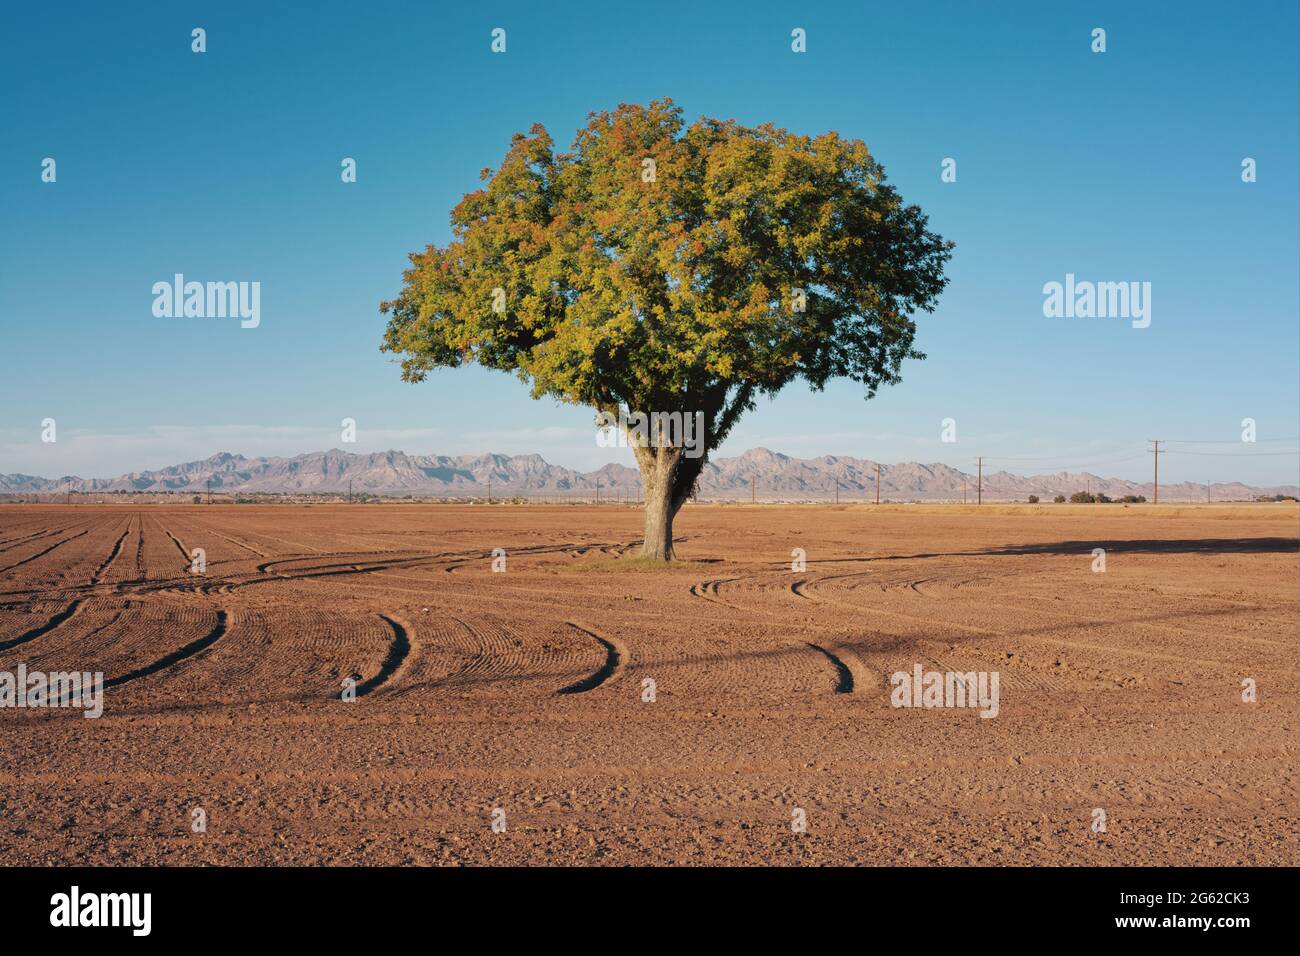 A lonely tree in an empty field. Stock Photo